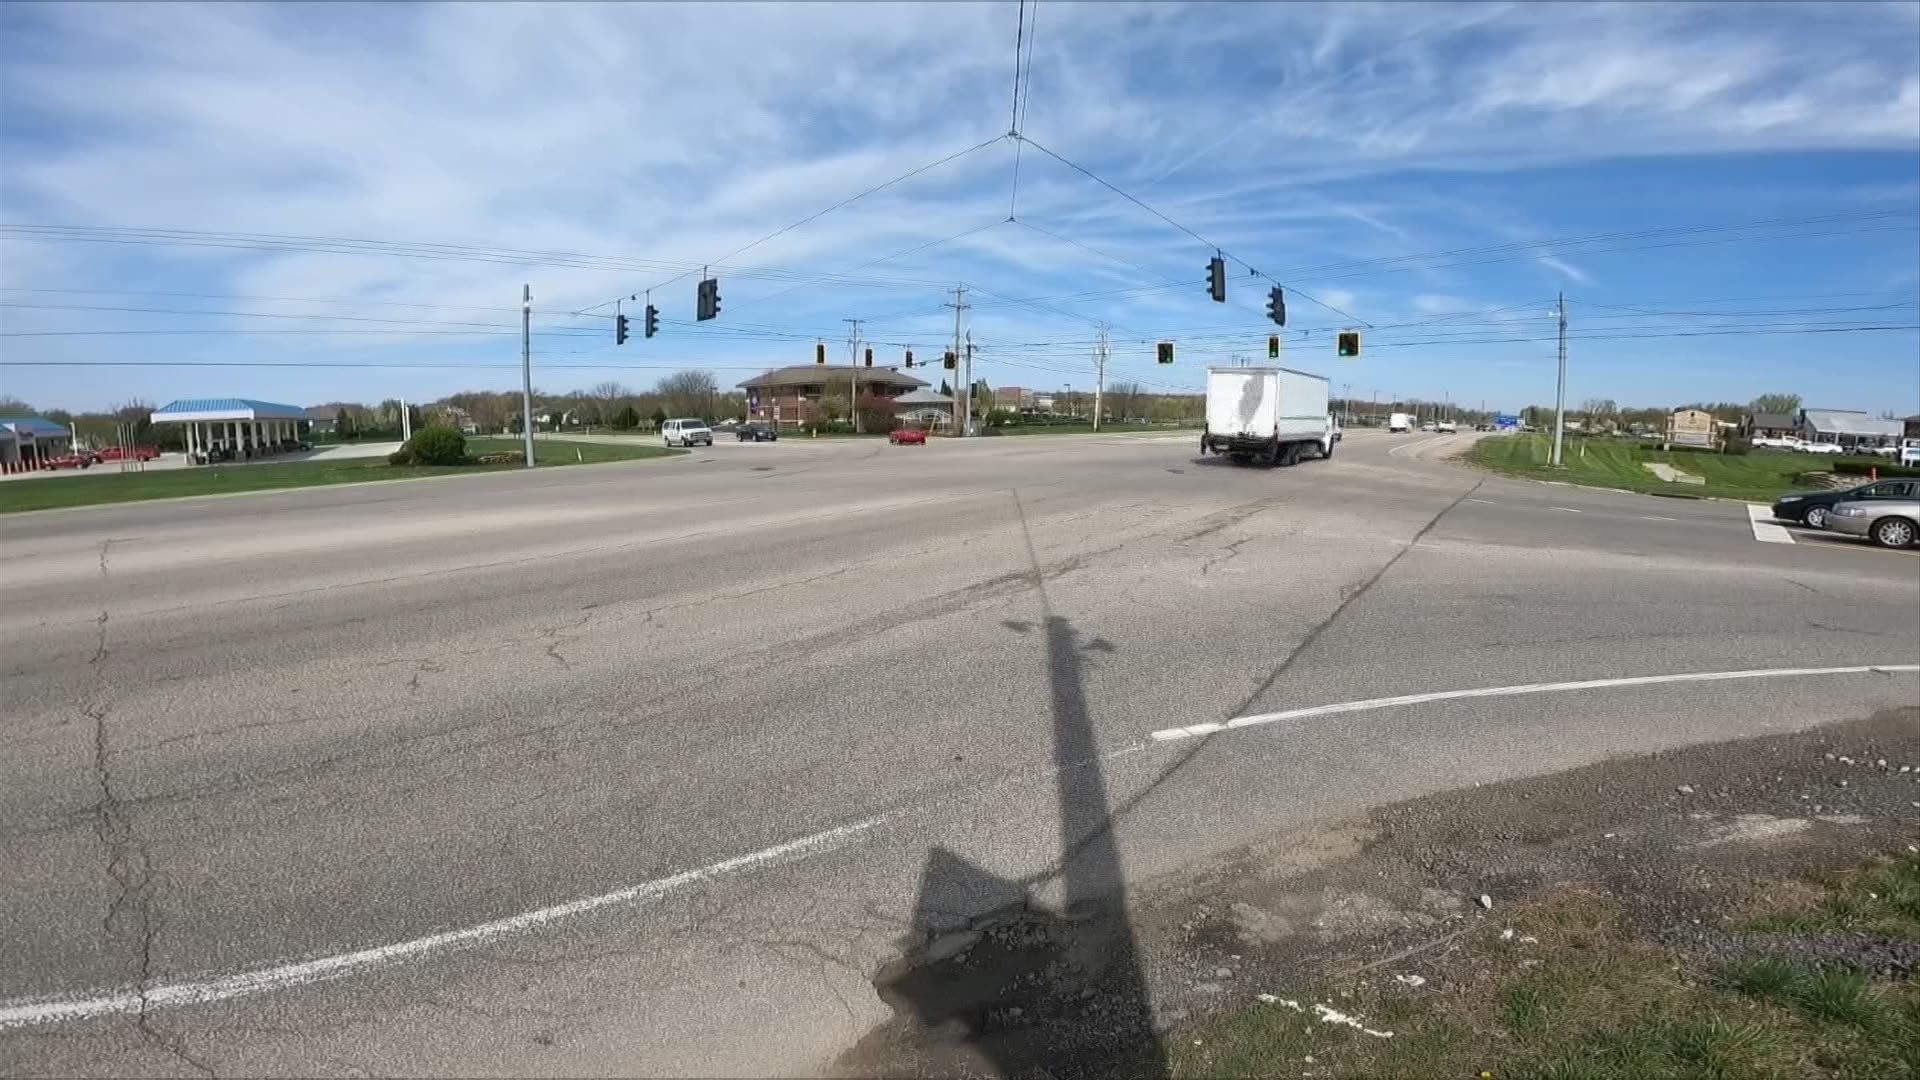 A map provided by Highway Patrol shows there have been 23 crashes within 100 feet of the intersection since 2019.